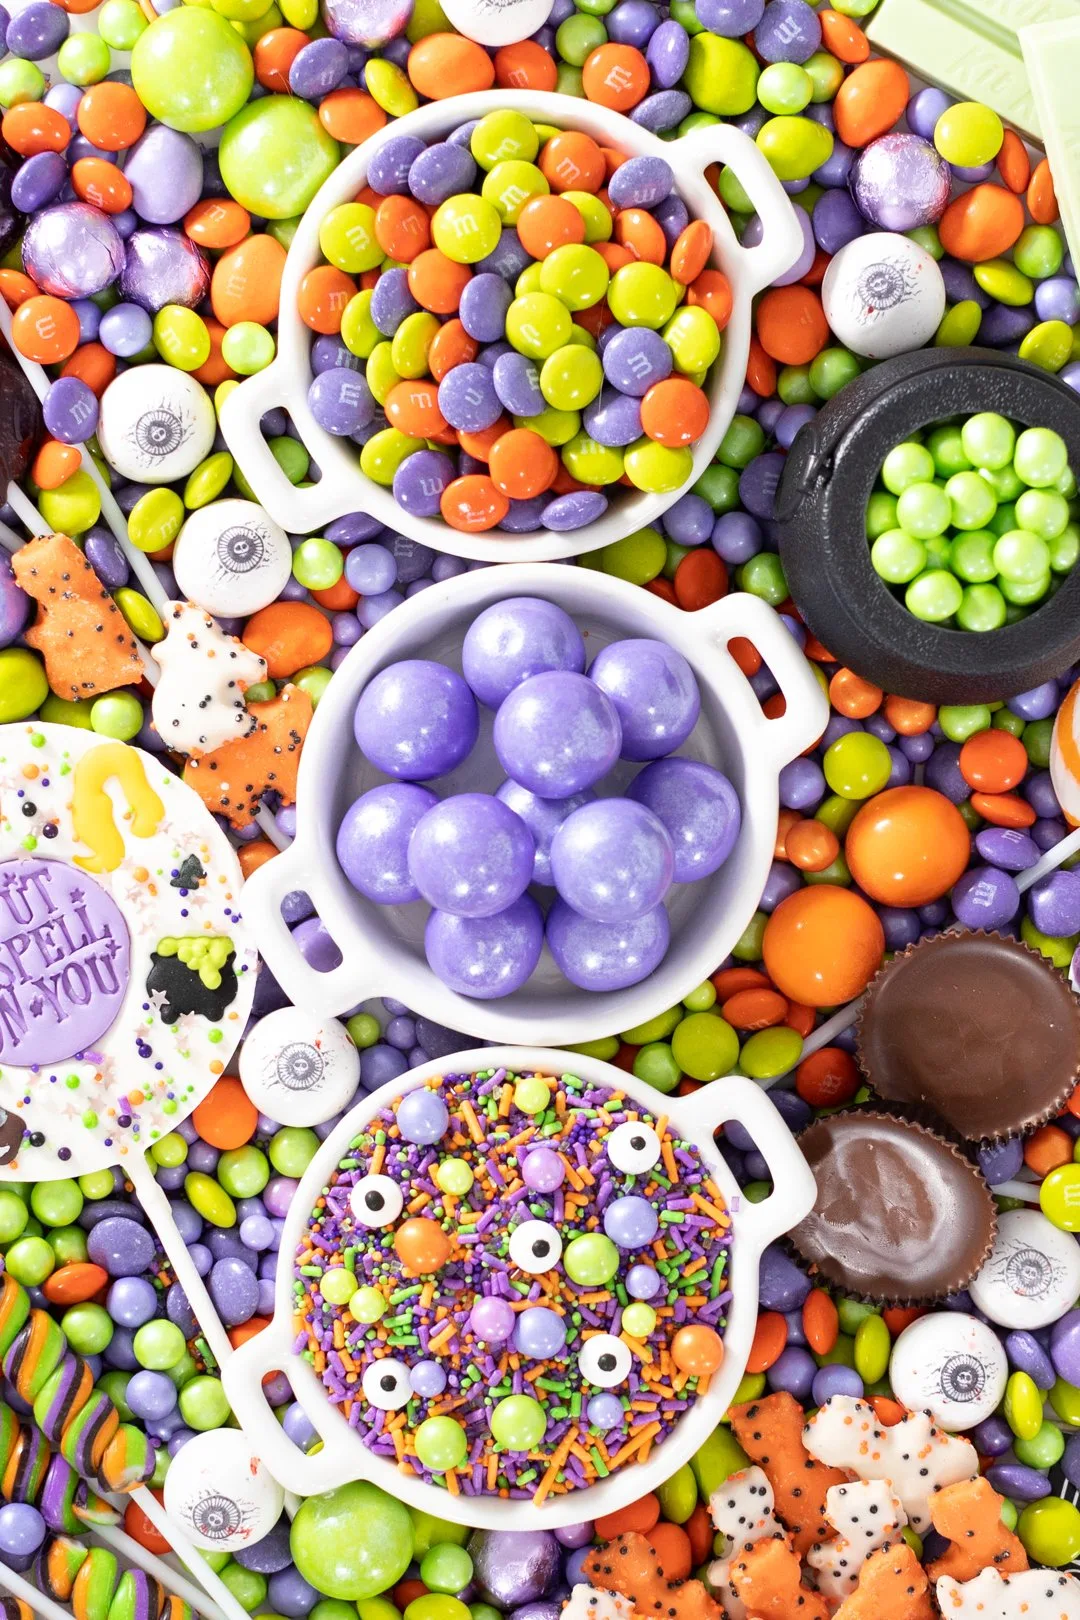 candy up close. halloween sprinkles, gumballs, M&Ms and more.